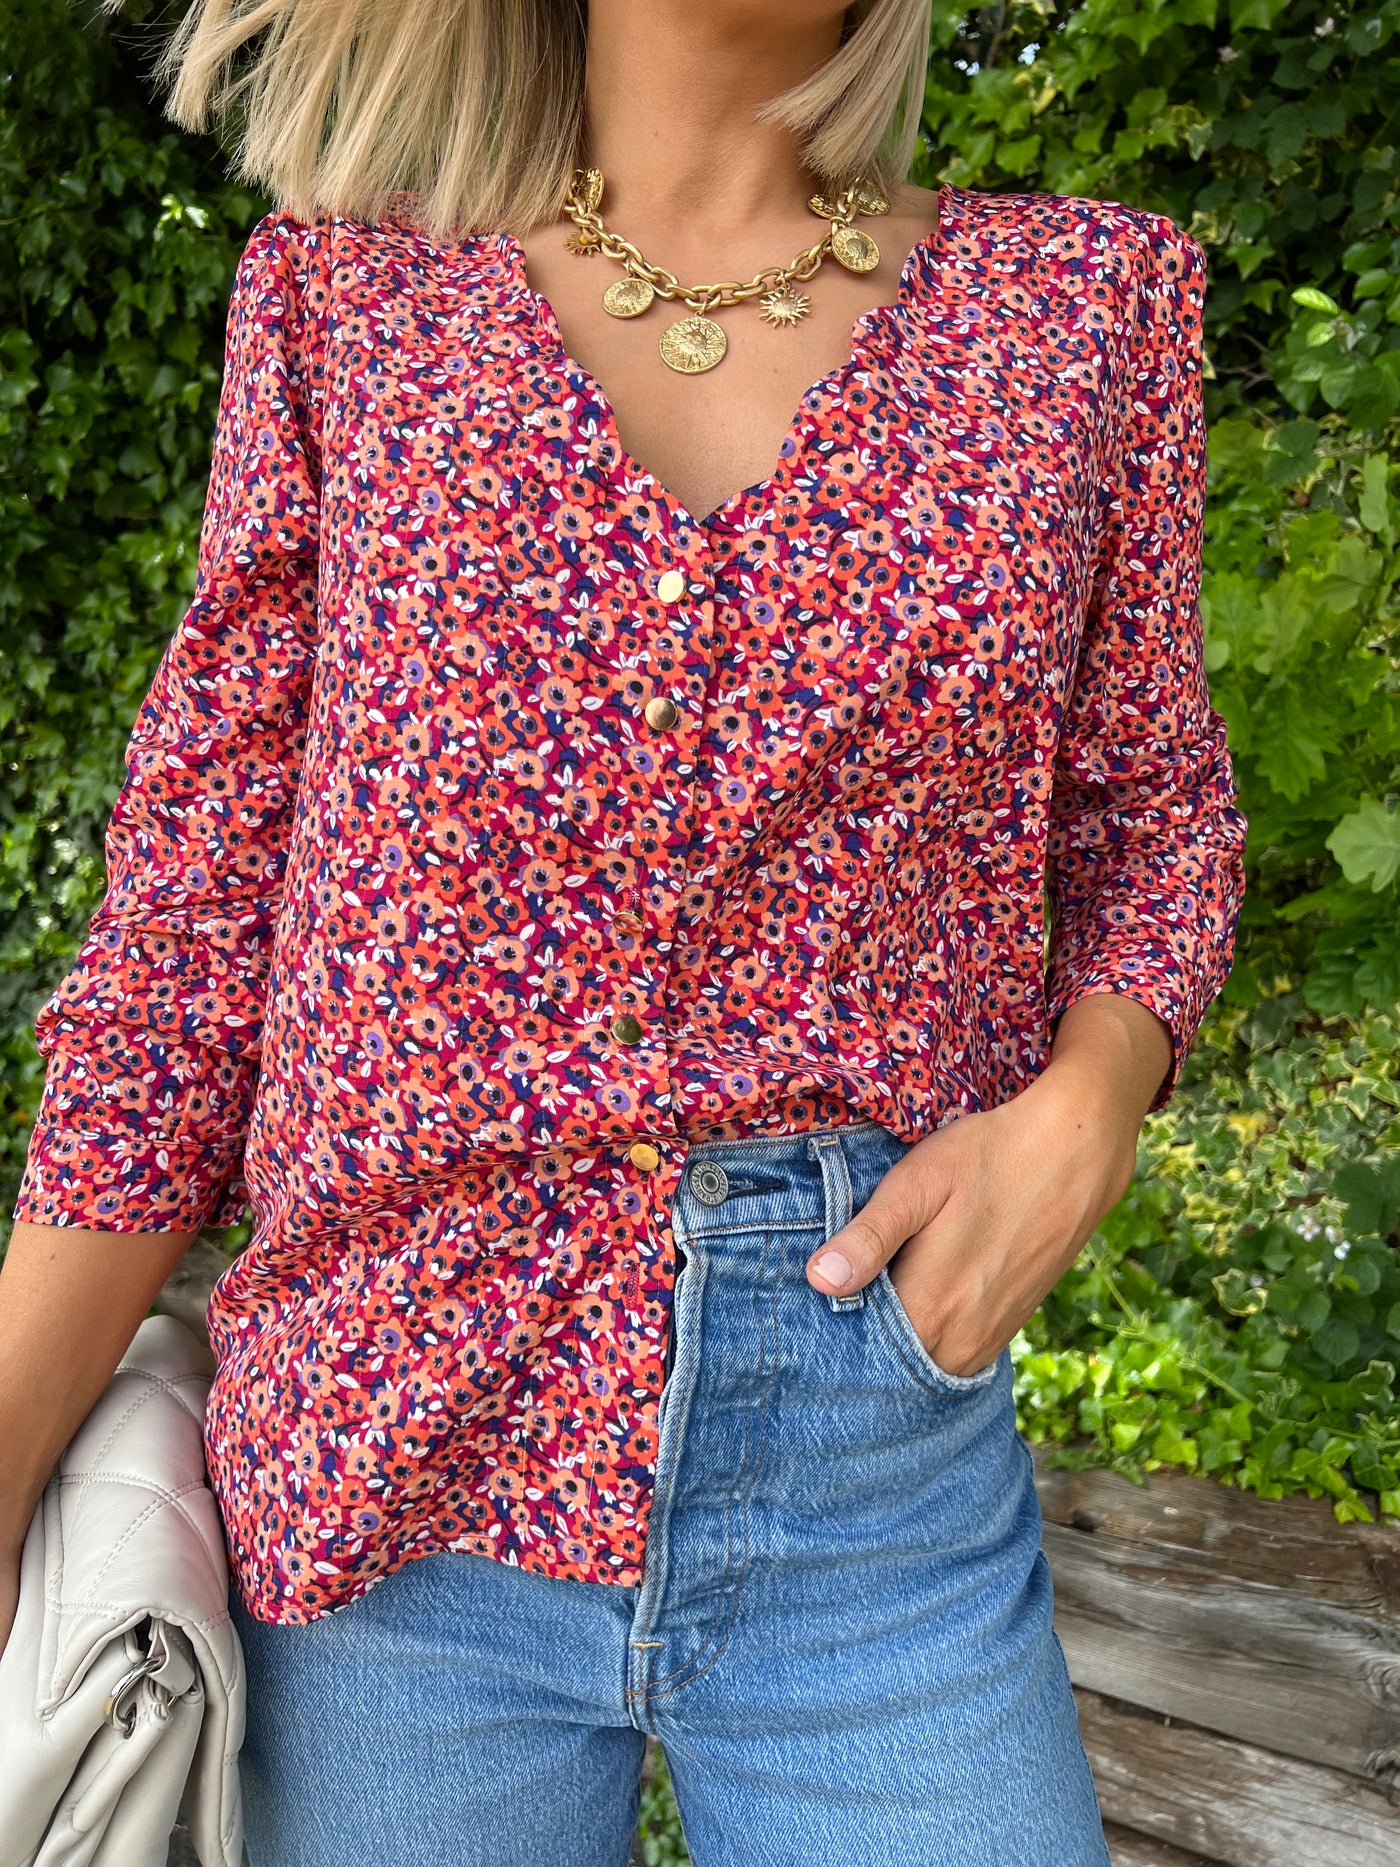 Scalloped Printed Blouse